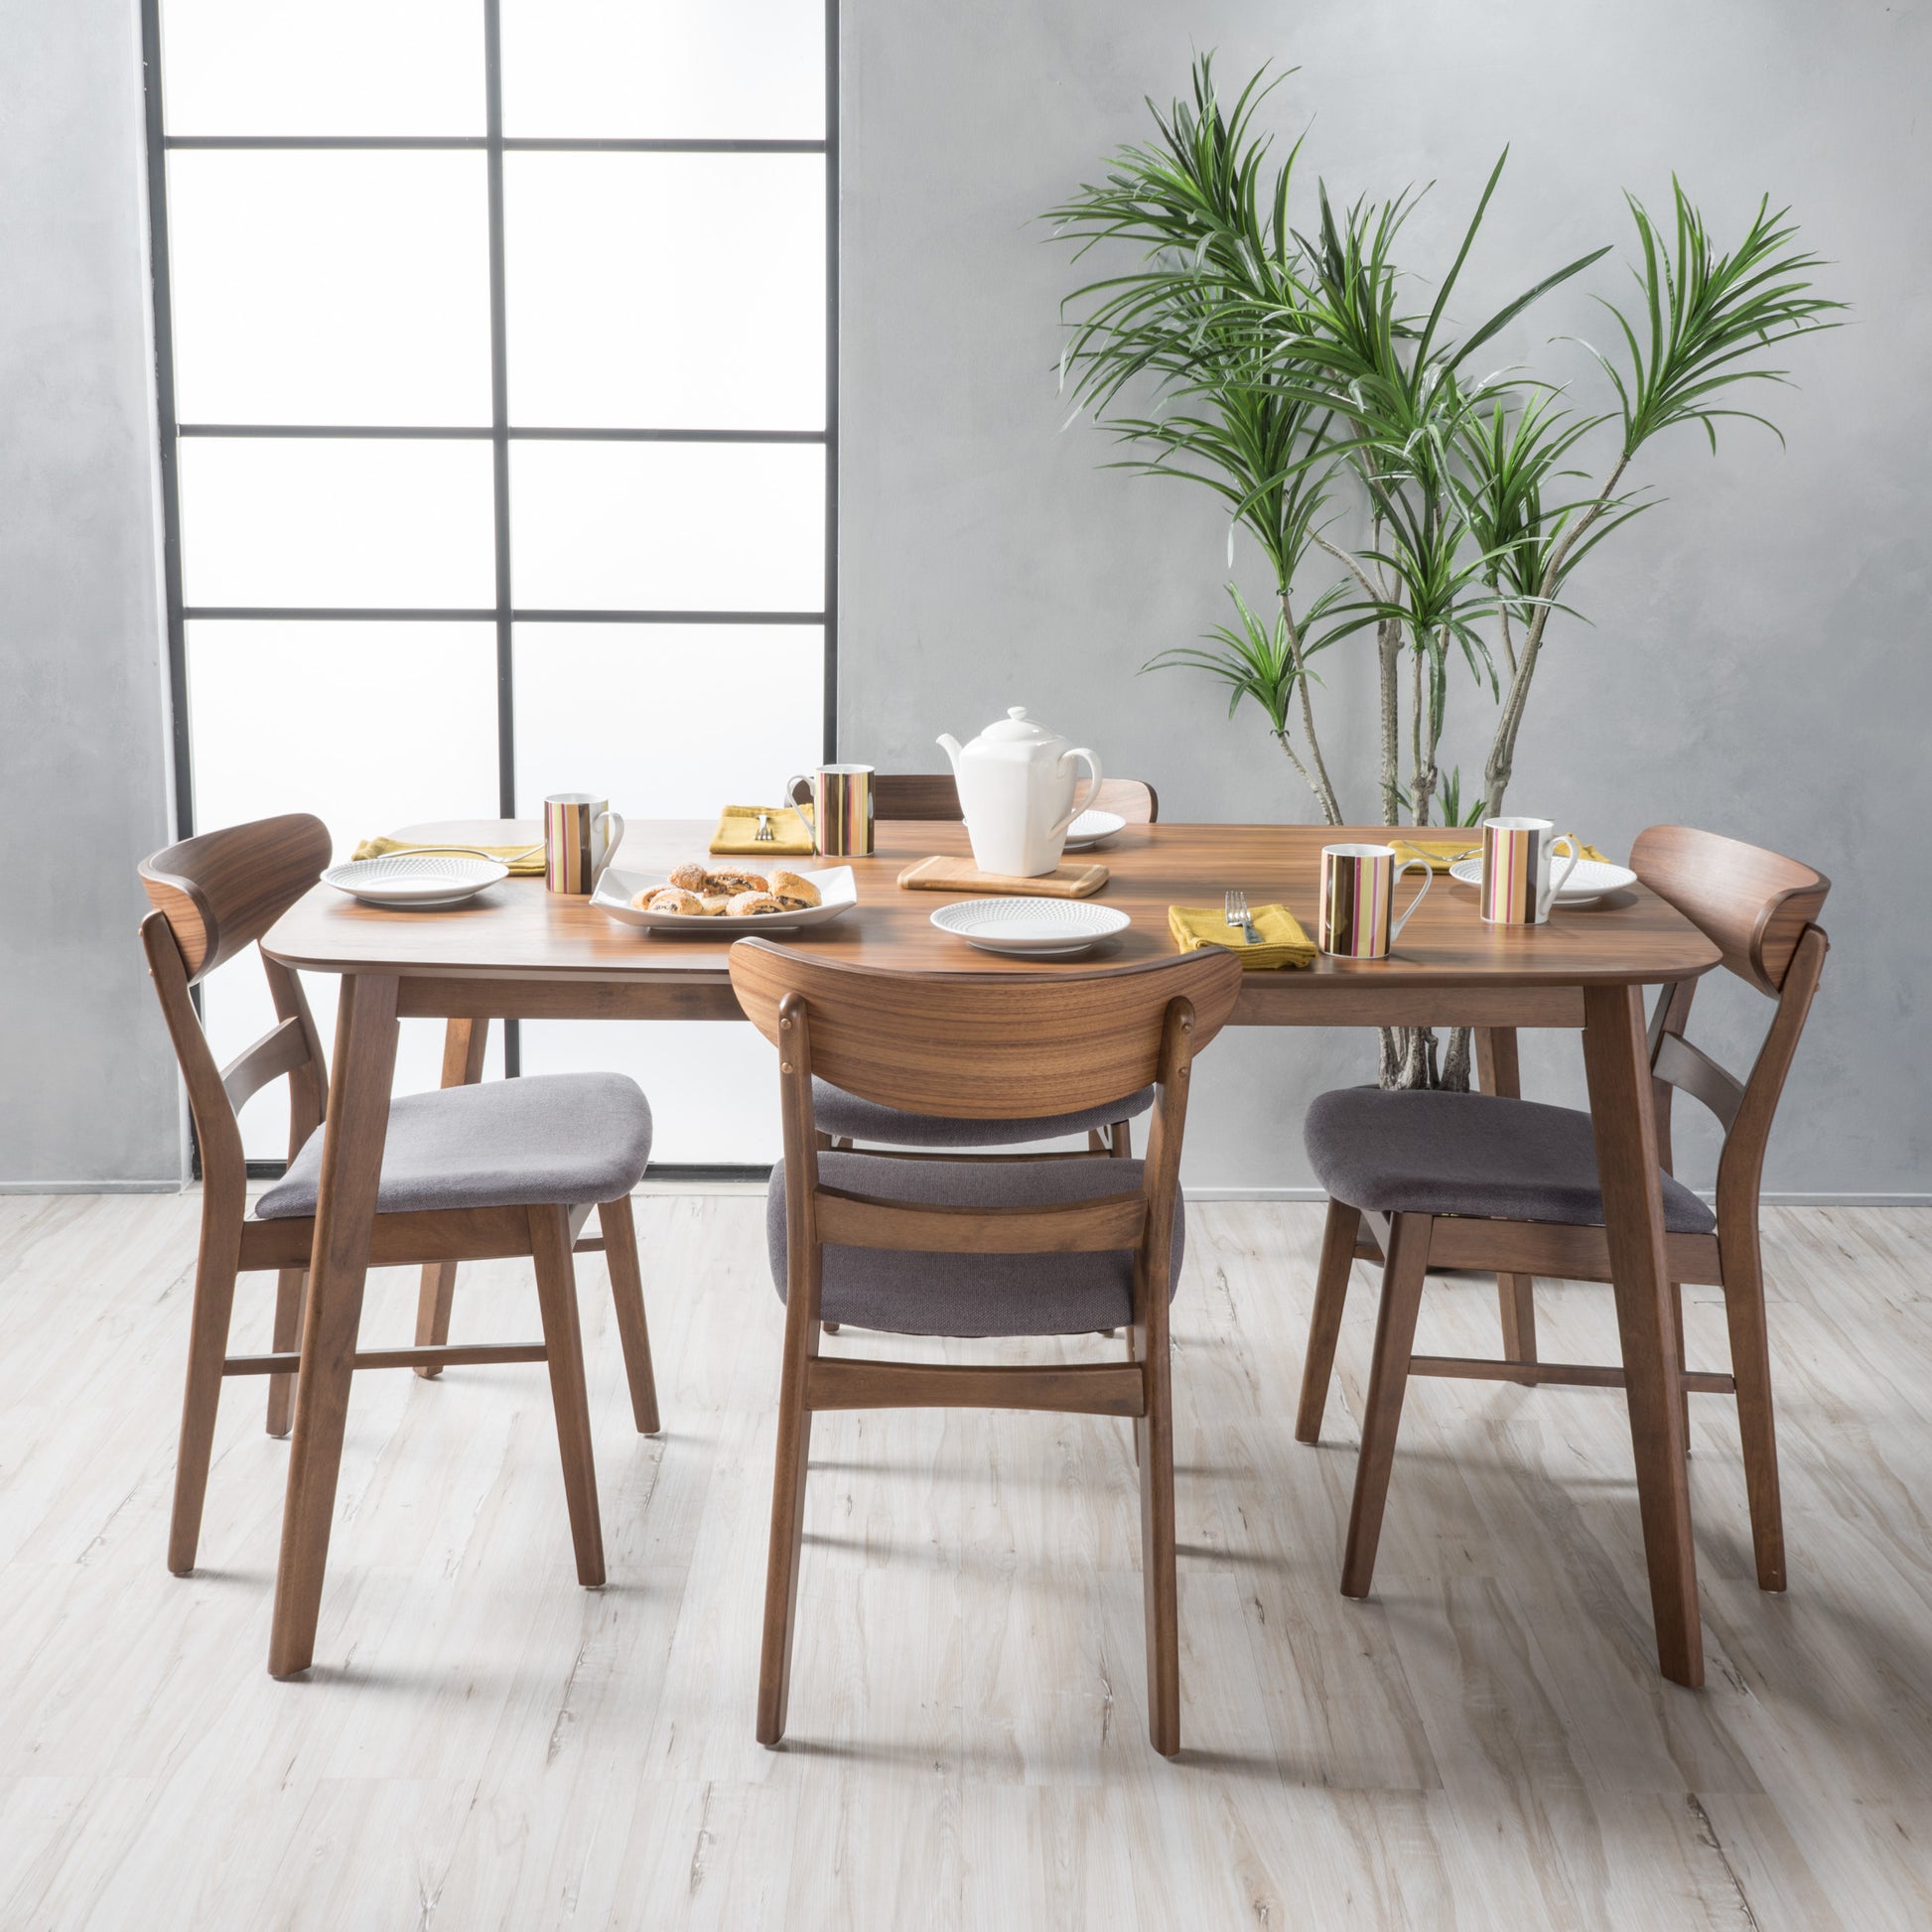 5 Pieces Modern Dining Table Set with 1 Rectangular Table and 4 Chairs  Fabric Cushion for 4 All Rubber wood Kitchen Dining Table for Dining Room  Kitchen Small Space Walnut Color and Grey 